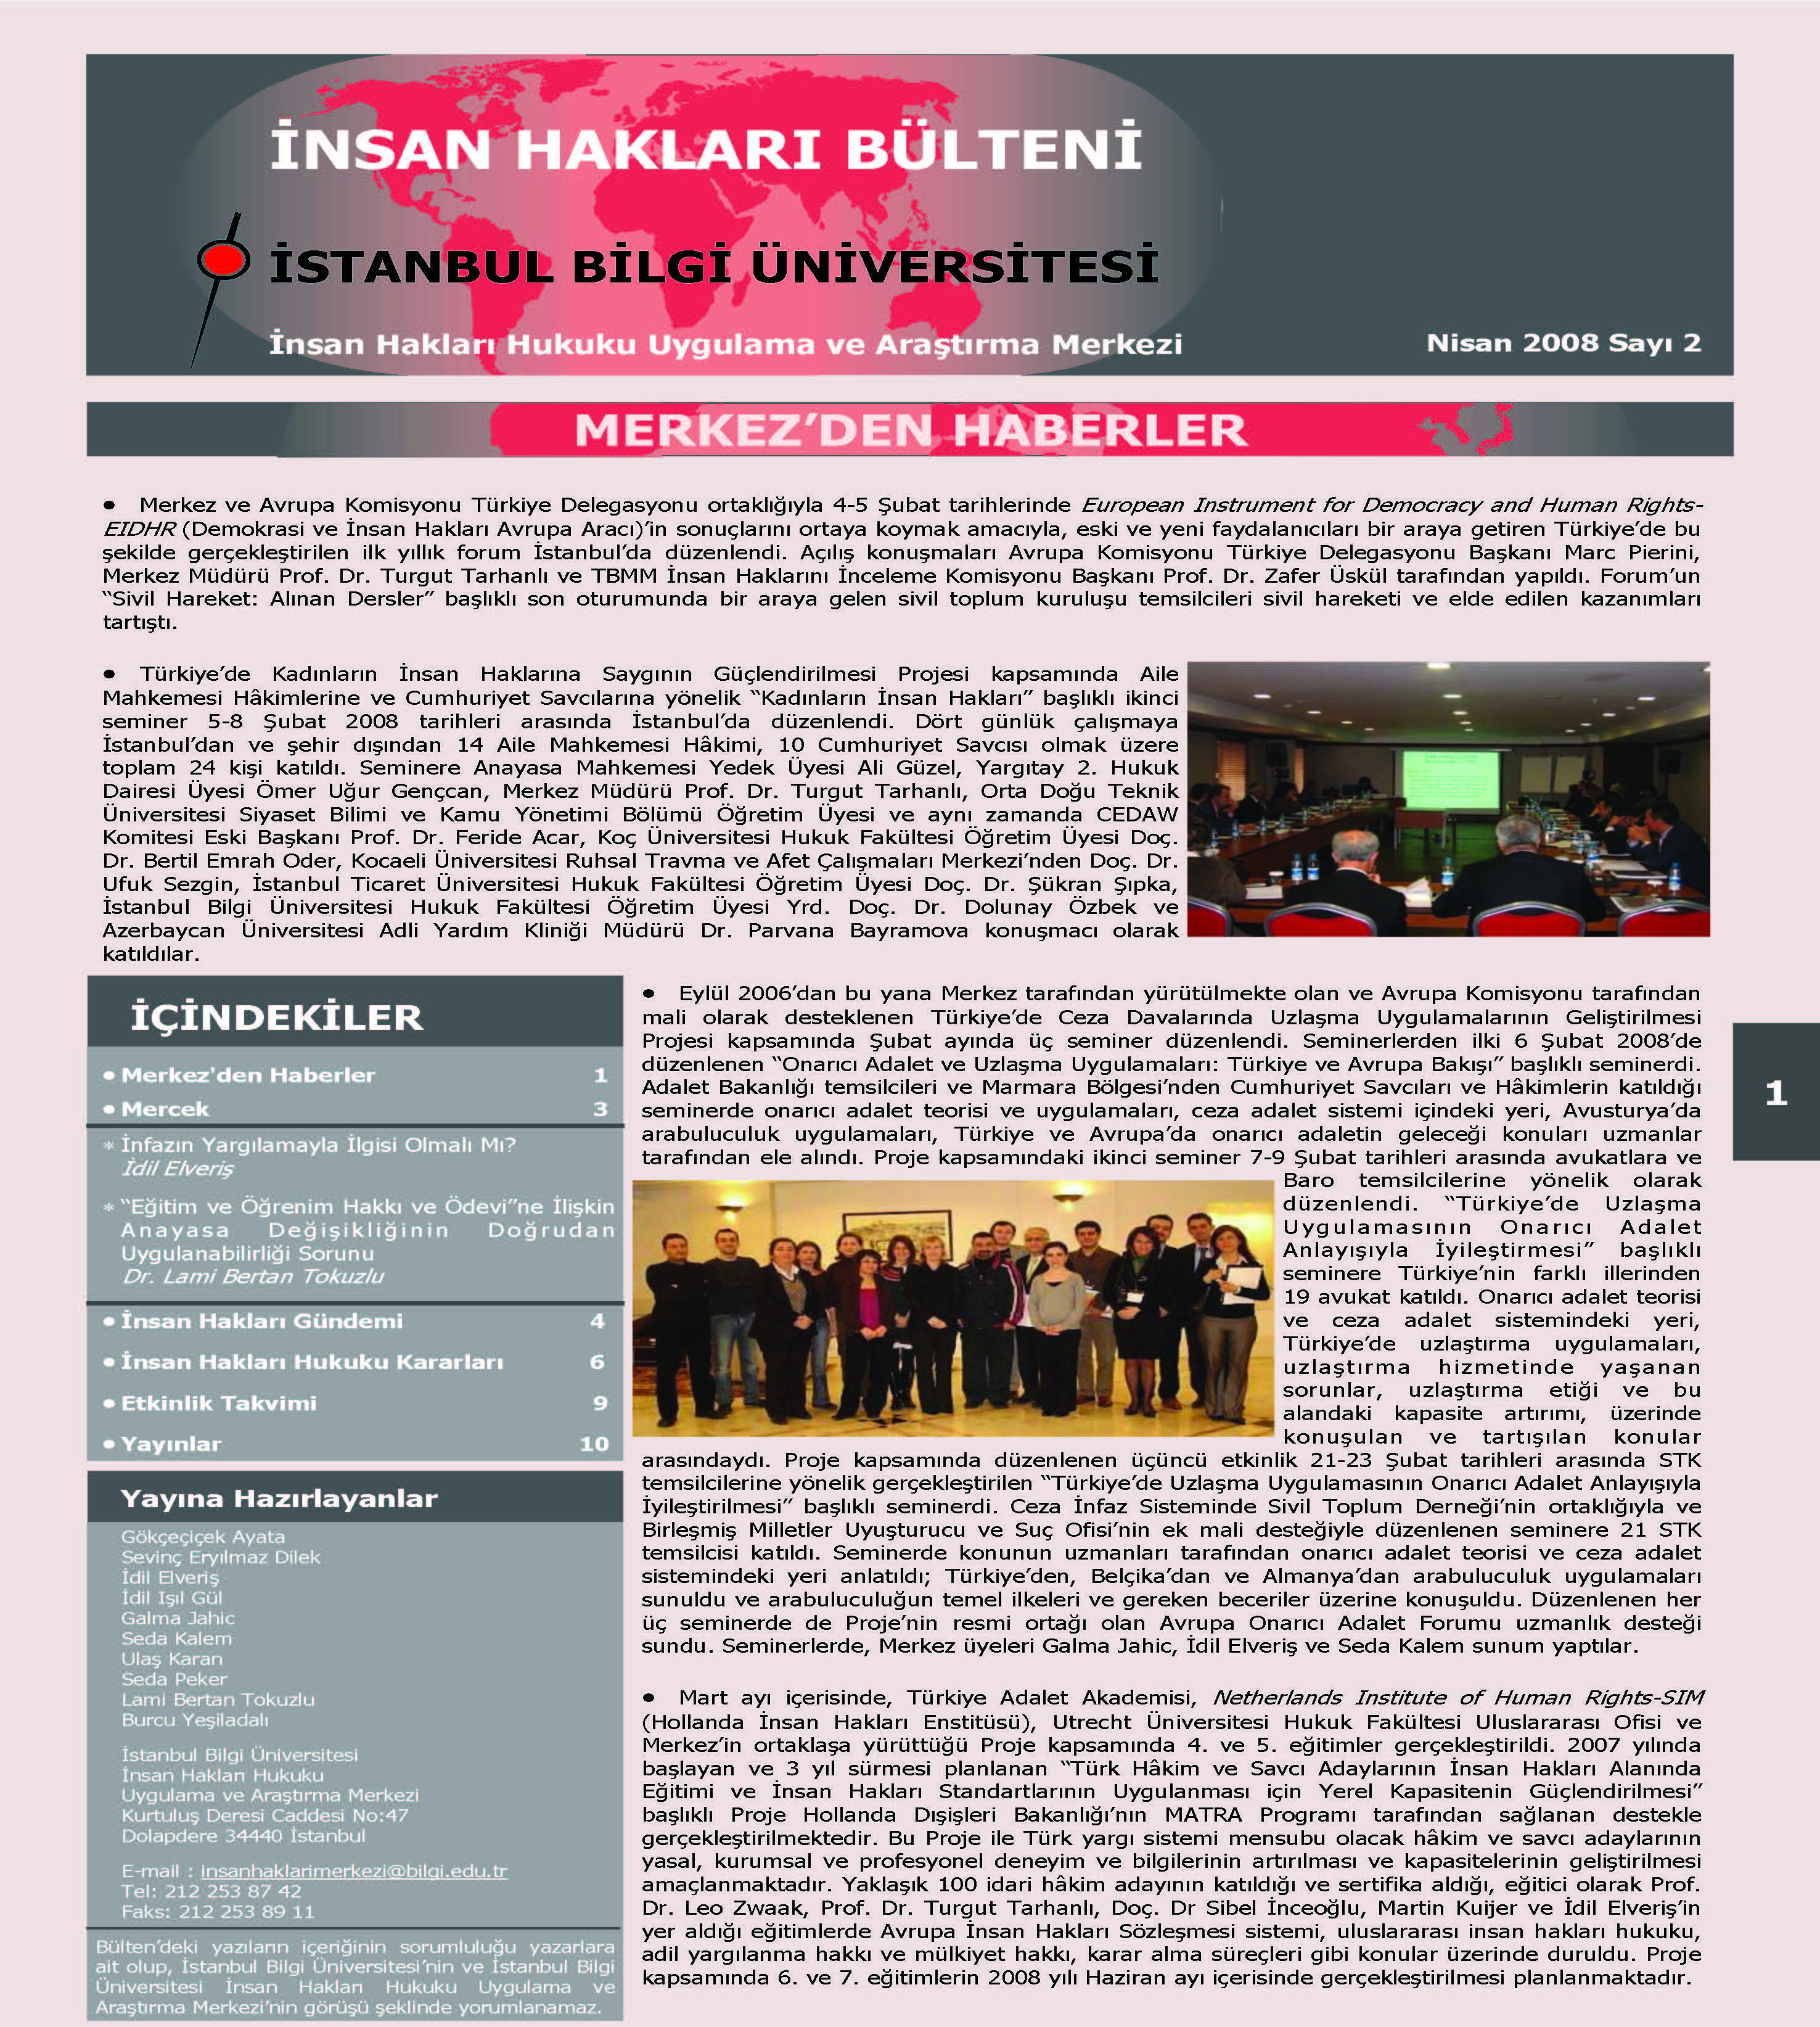 Human Rights Bulletin, April 2008, Issue 2